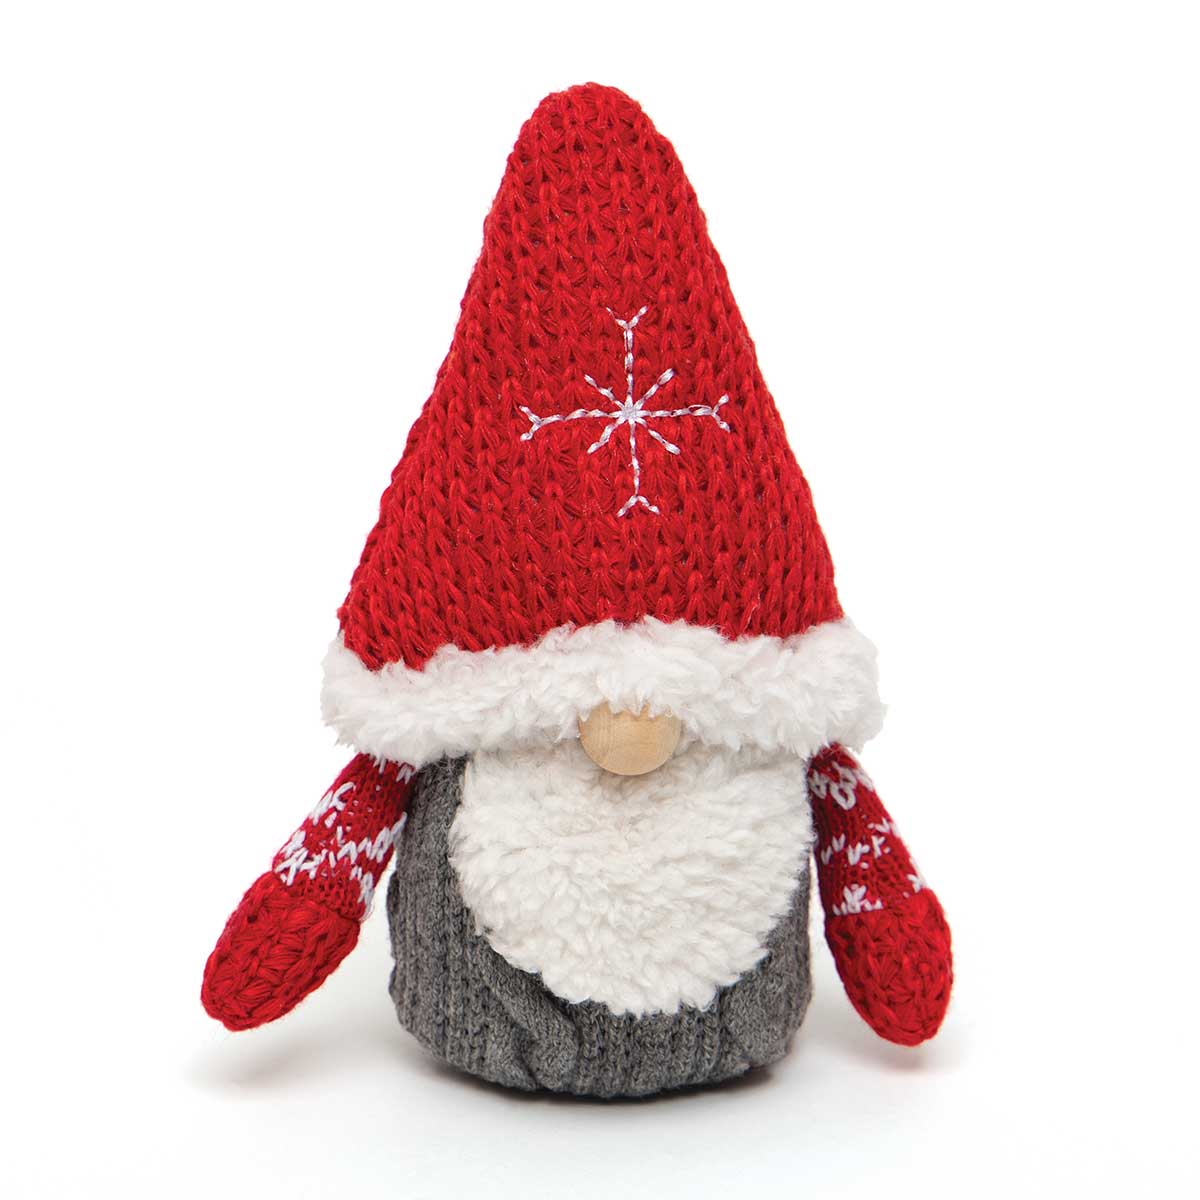 Swede Gnome Ornament Red/Grey with Sweater Hat, White Sherpa Bea